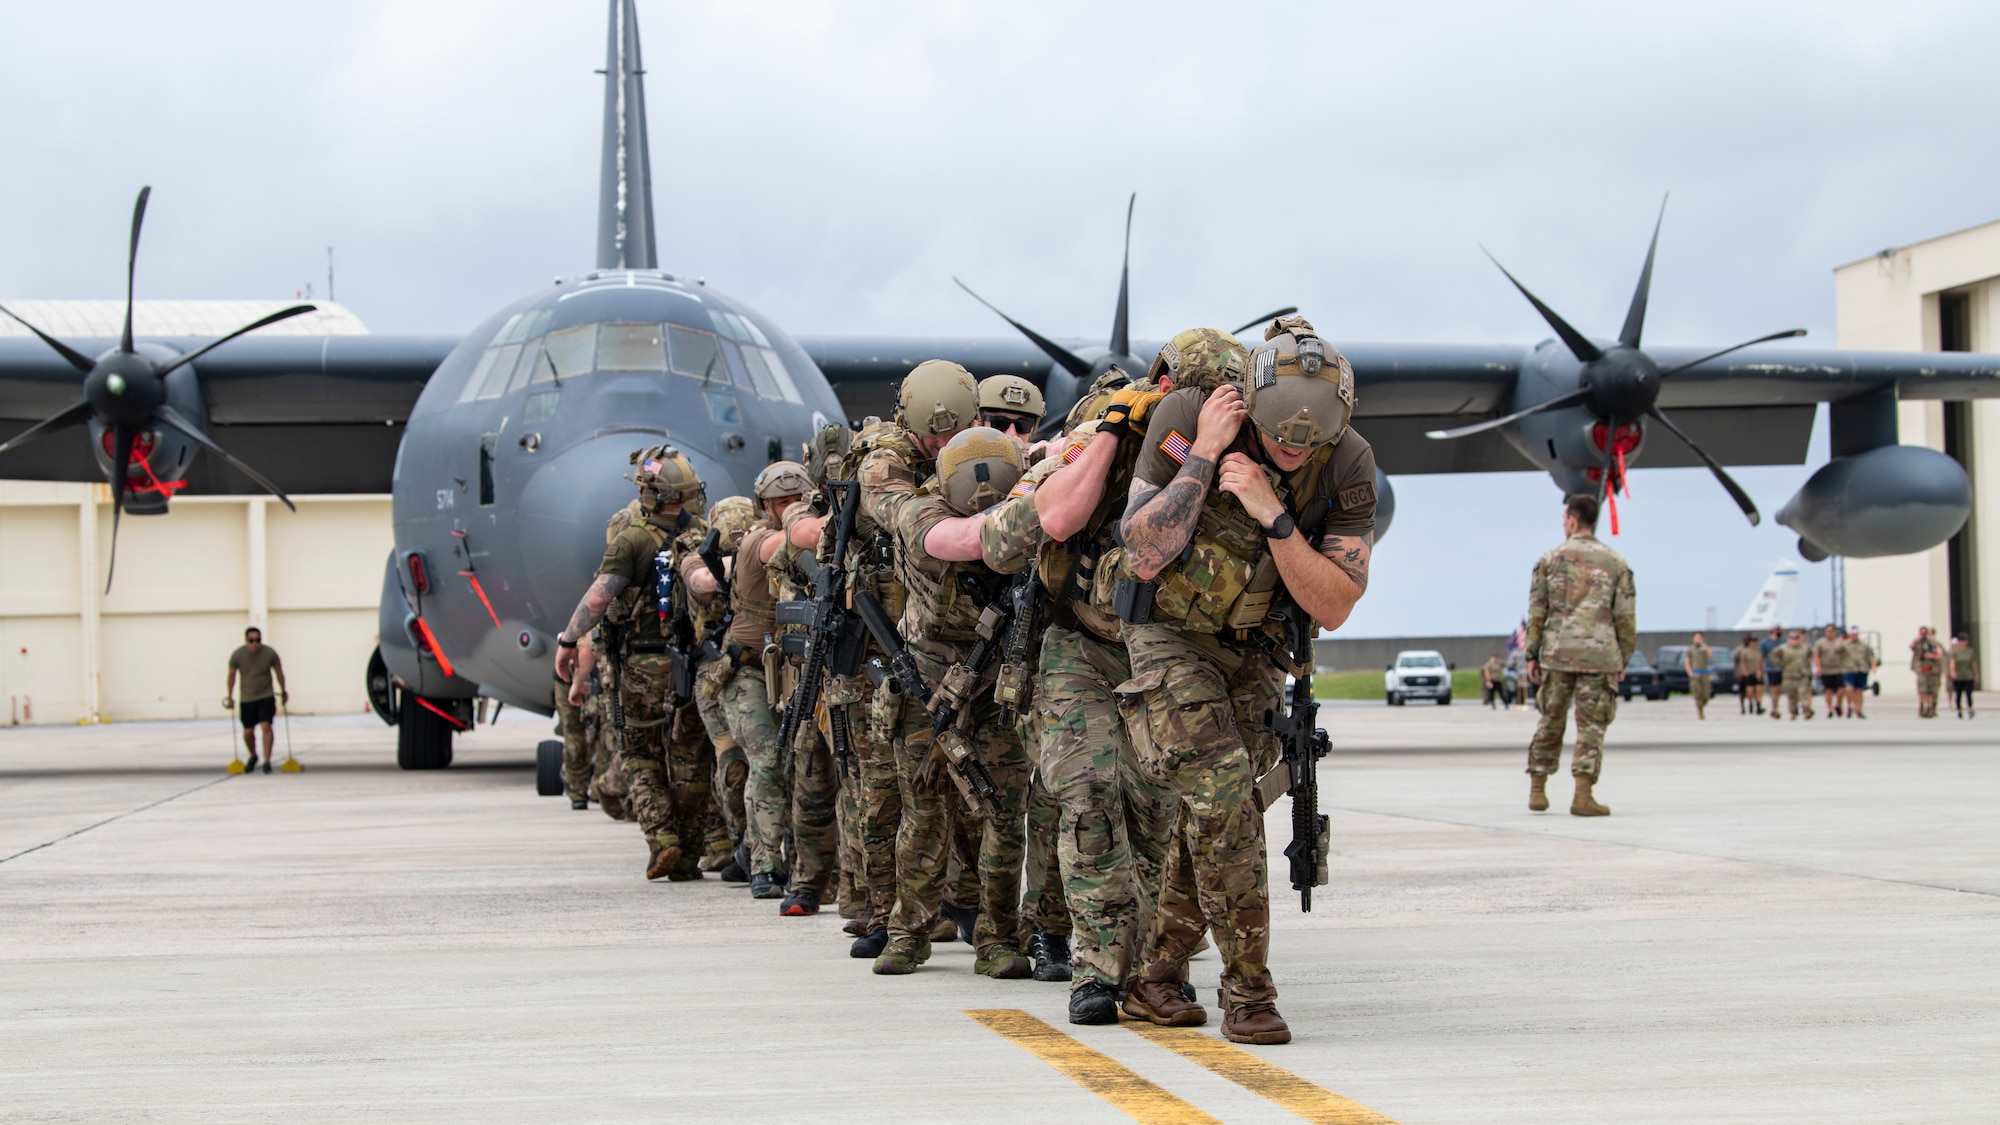 U.S. Air Force special tactics Airmen with the 320th Special Tactics Squadron pull an MC-130J Commando II 150 meters across the parking apron during Monster Mash, an operational readiness and resilience training, at Kadena Air Base, Japan, May 5, 2023. The Airmen were presented with multiple tasks throughout the seven mile route, including a humvee push, litter carries and fast rope insertions, all while wearing a full ensemble of body armor, weapons and equipment. (U.S. Air Force photo by Staff Sgt. Jessi Roth)